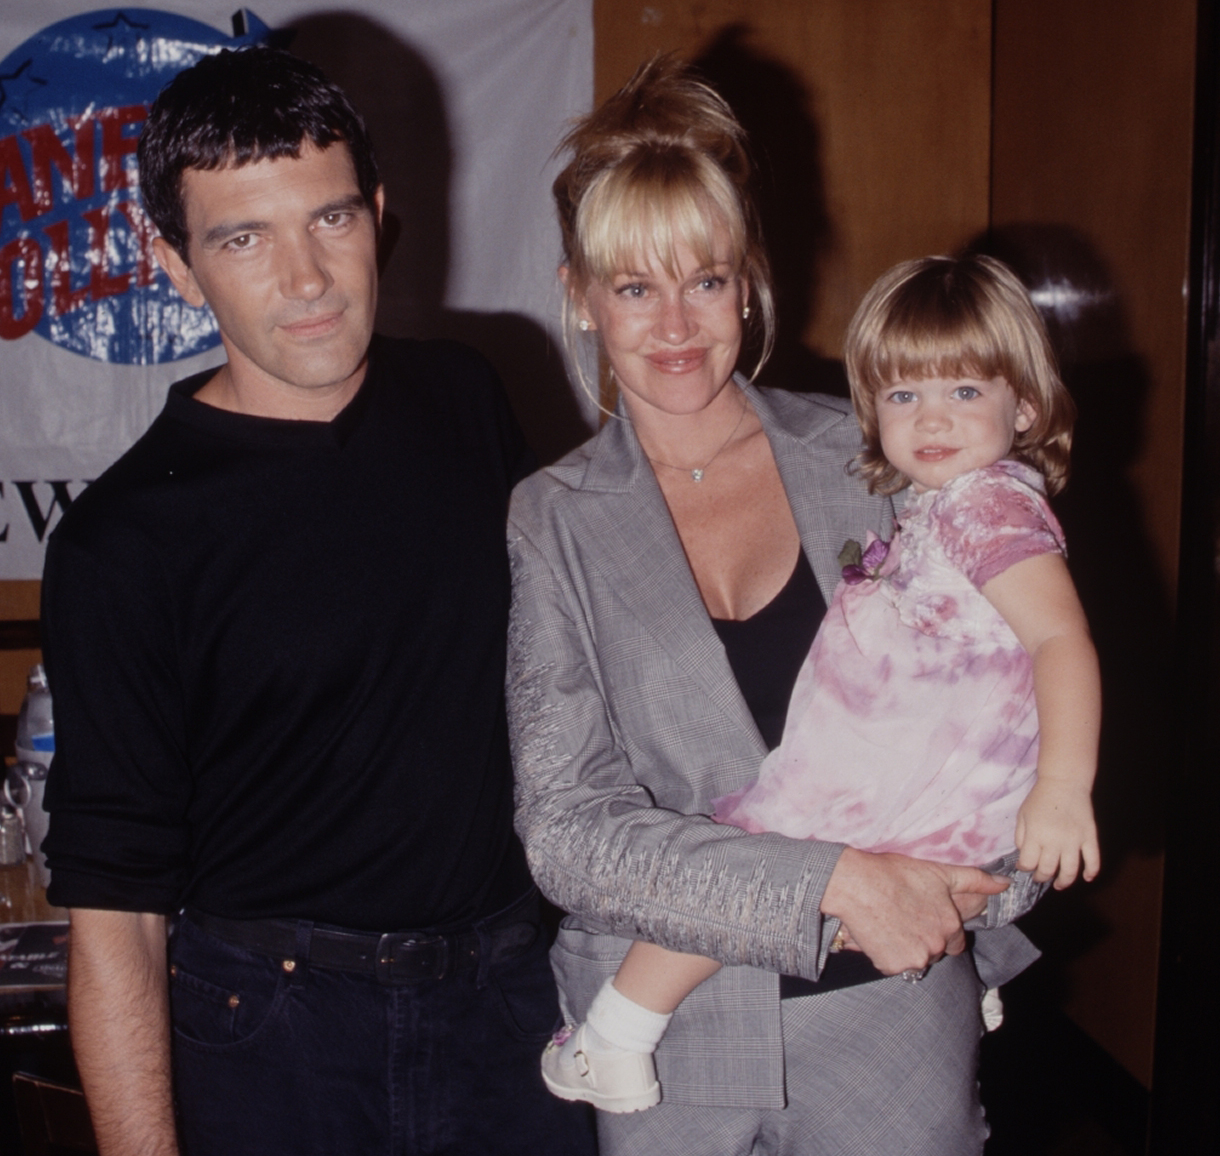 <p><a href="https://www.wonderwall.com/celebrity/profiles/overview/antonio-banderas-1193.article">Antonio Banderas</a> and then-wife Melanie Griffith posed with daughter Stella del Carmen, then 21 months old, at Planet Hollywood on July 16, 1998. Now see what she looks like as an adult...</p>